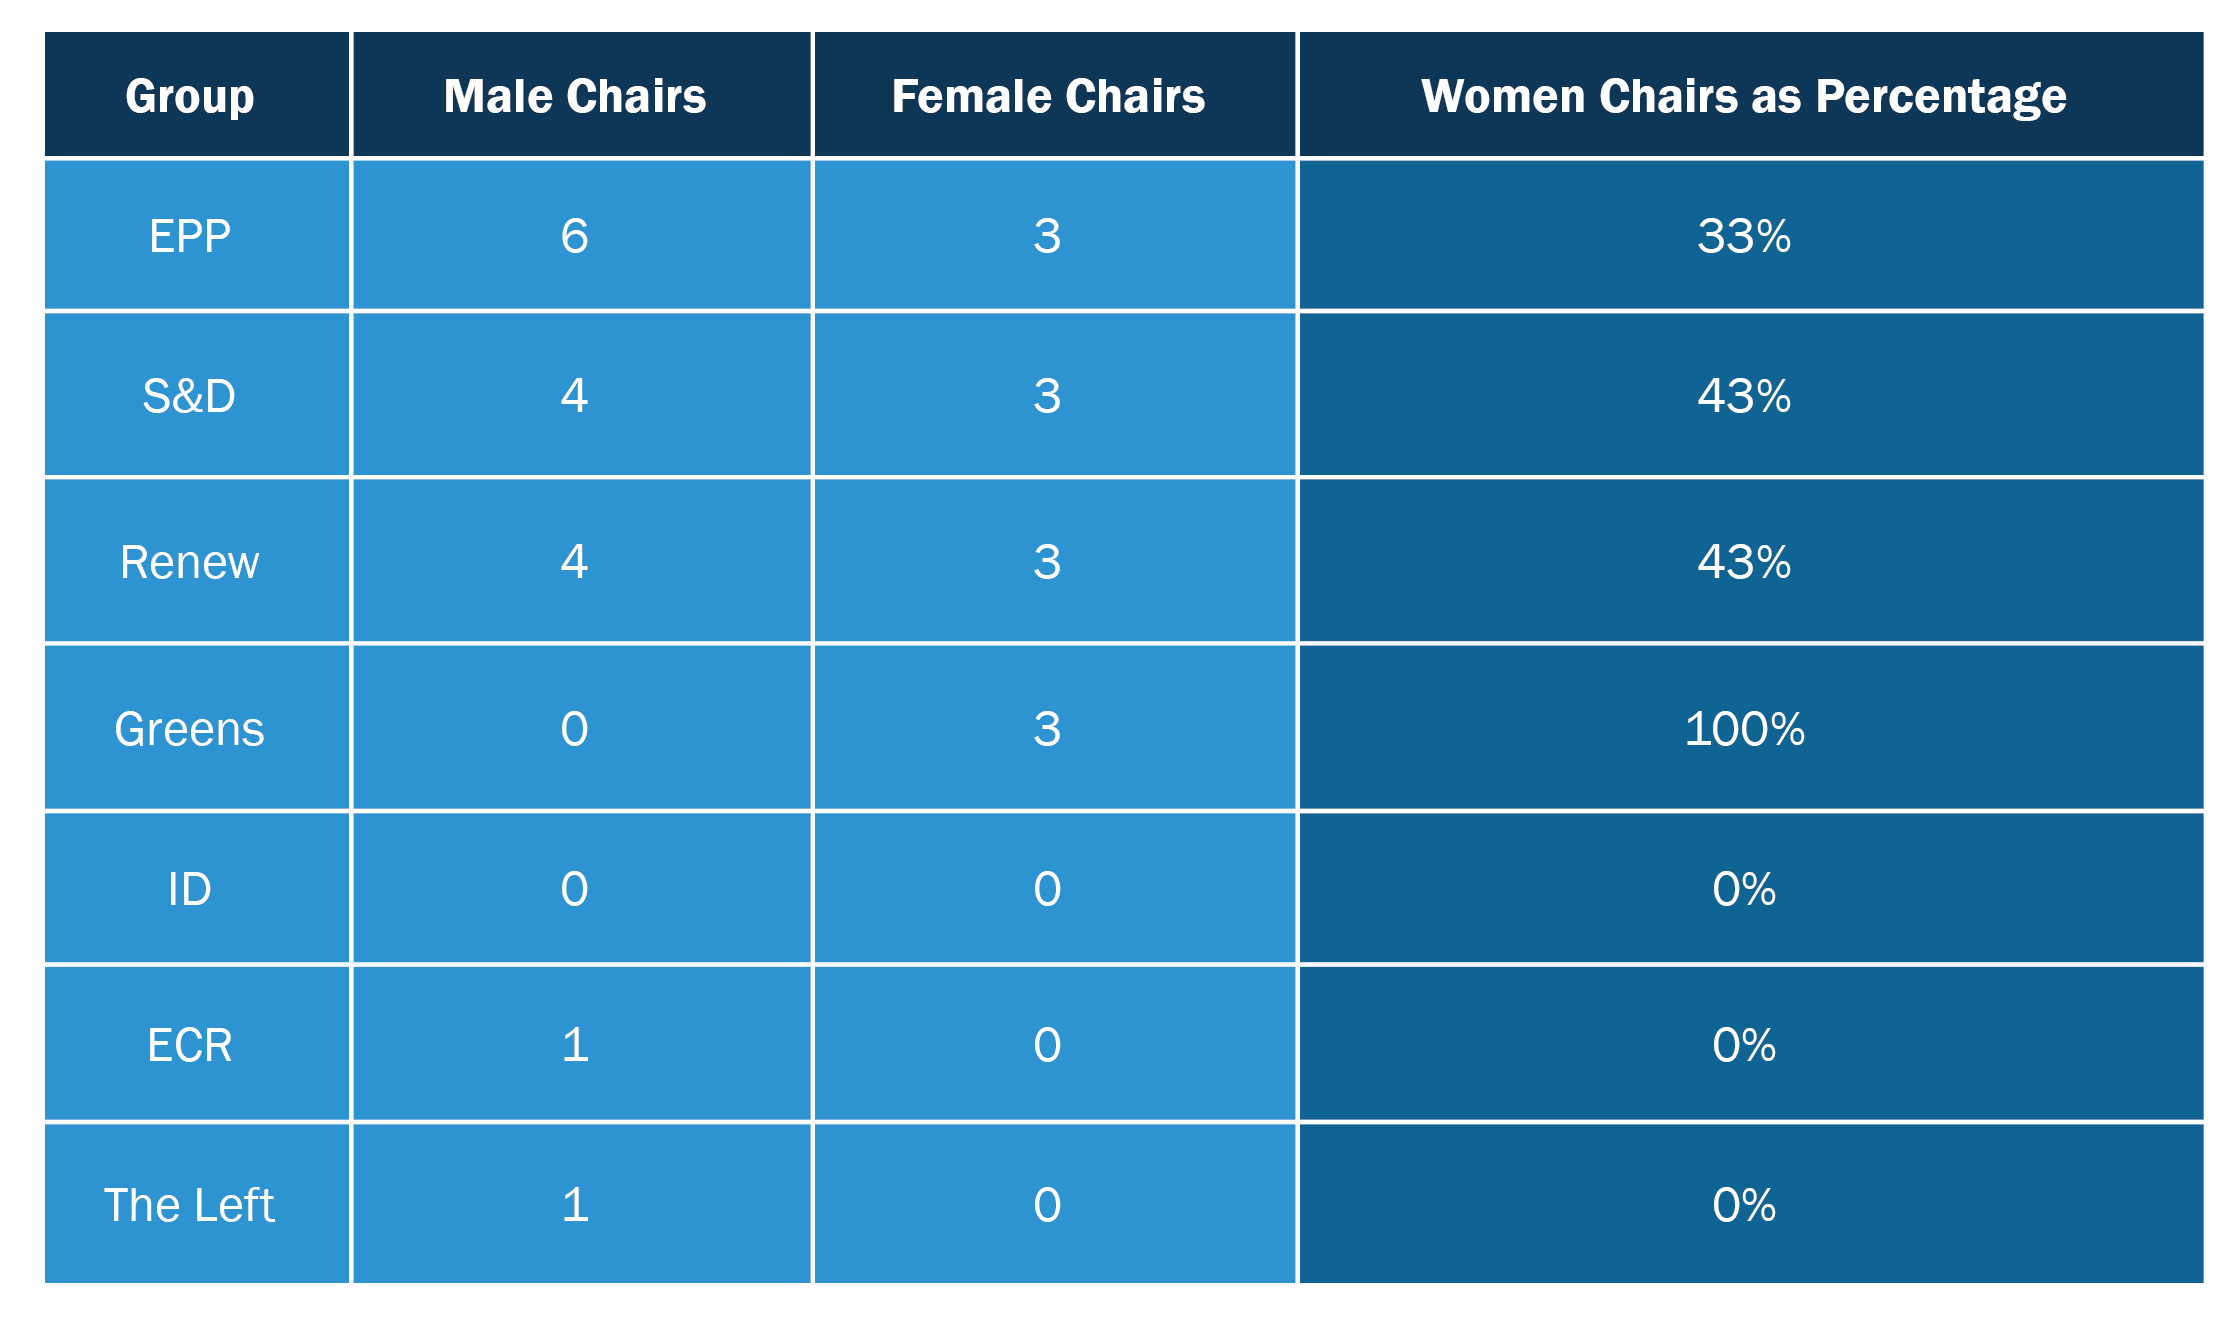 Table 3. Men and Women Chairs by Political Group, 2021.